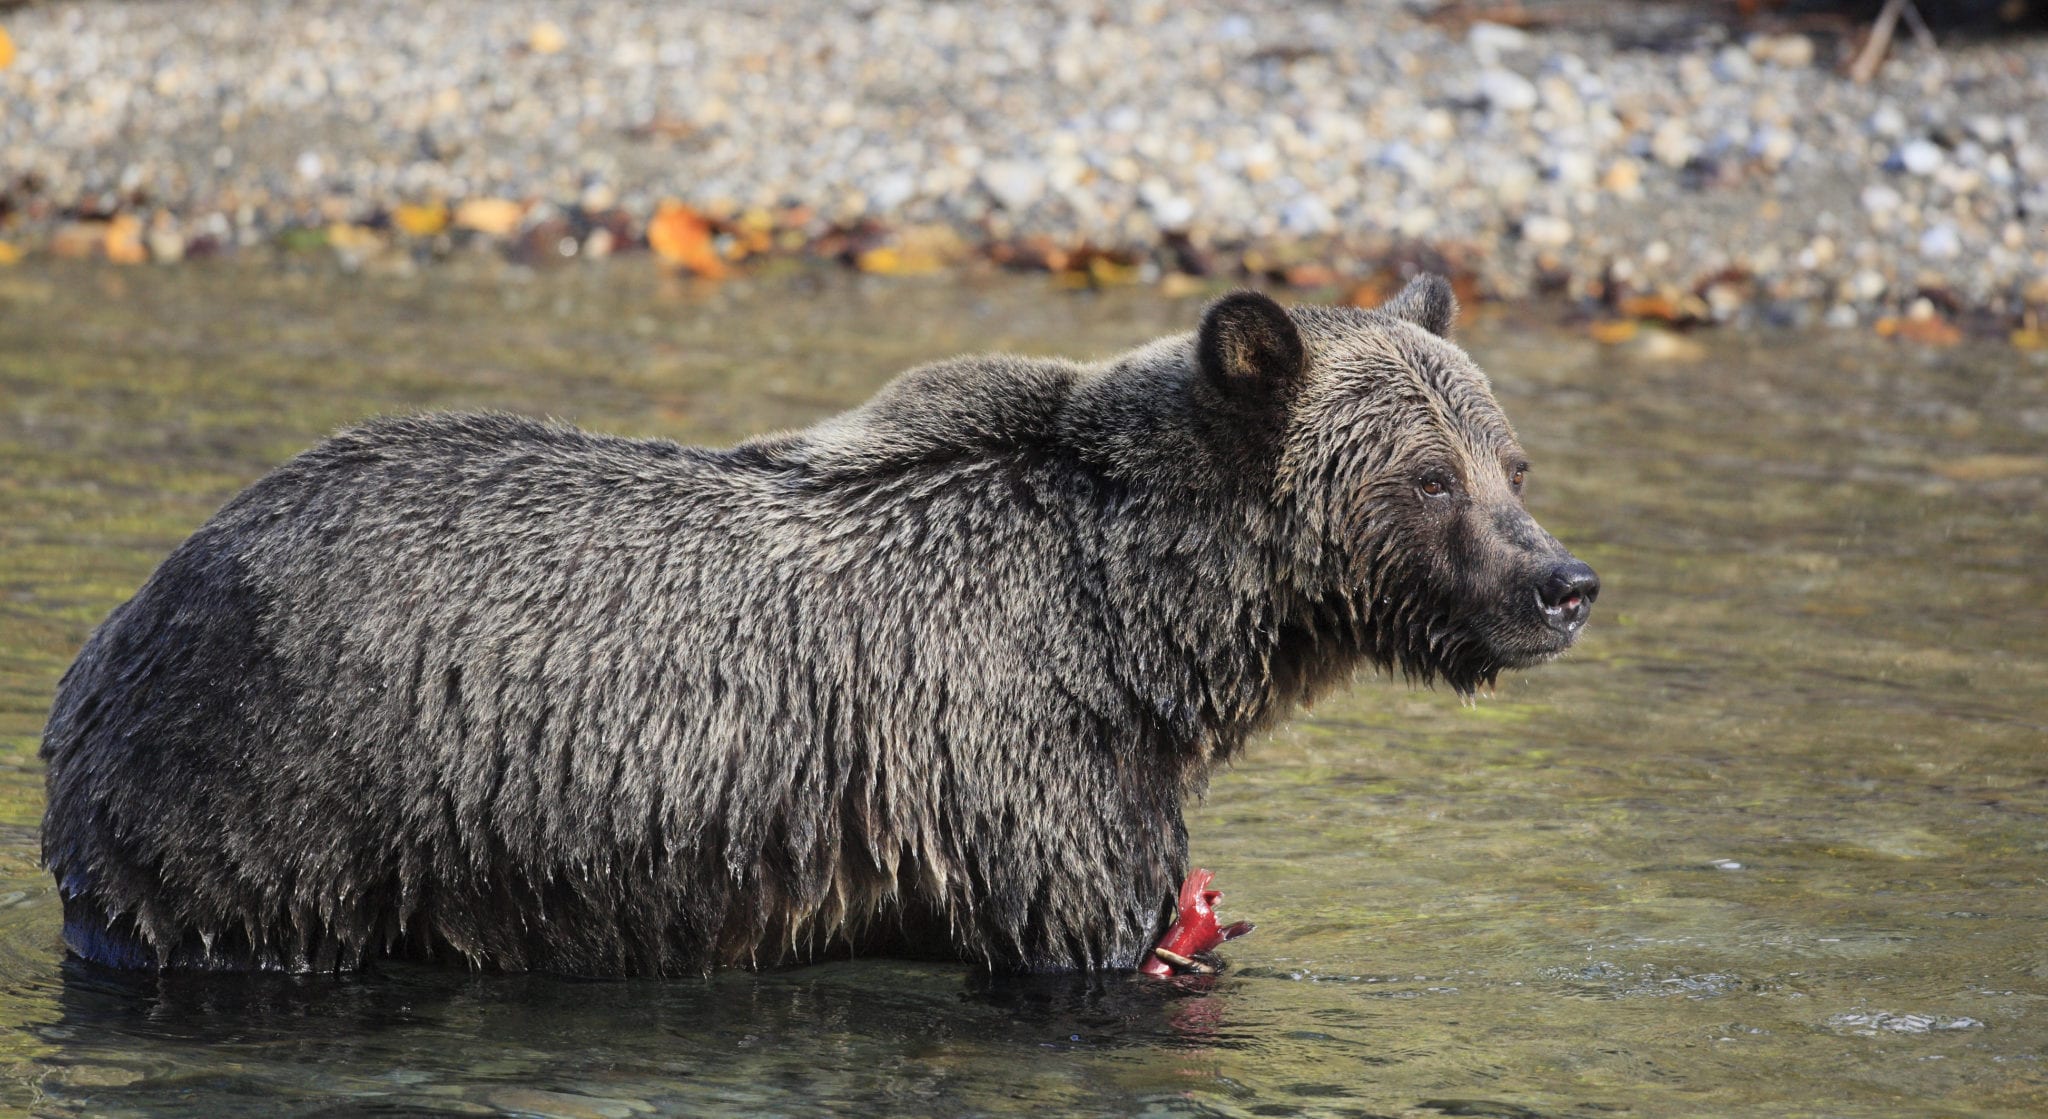 Where you can track and view wild bears